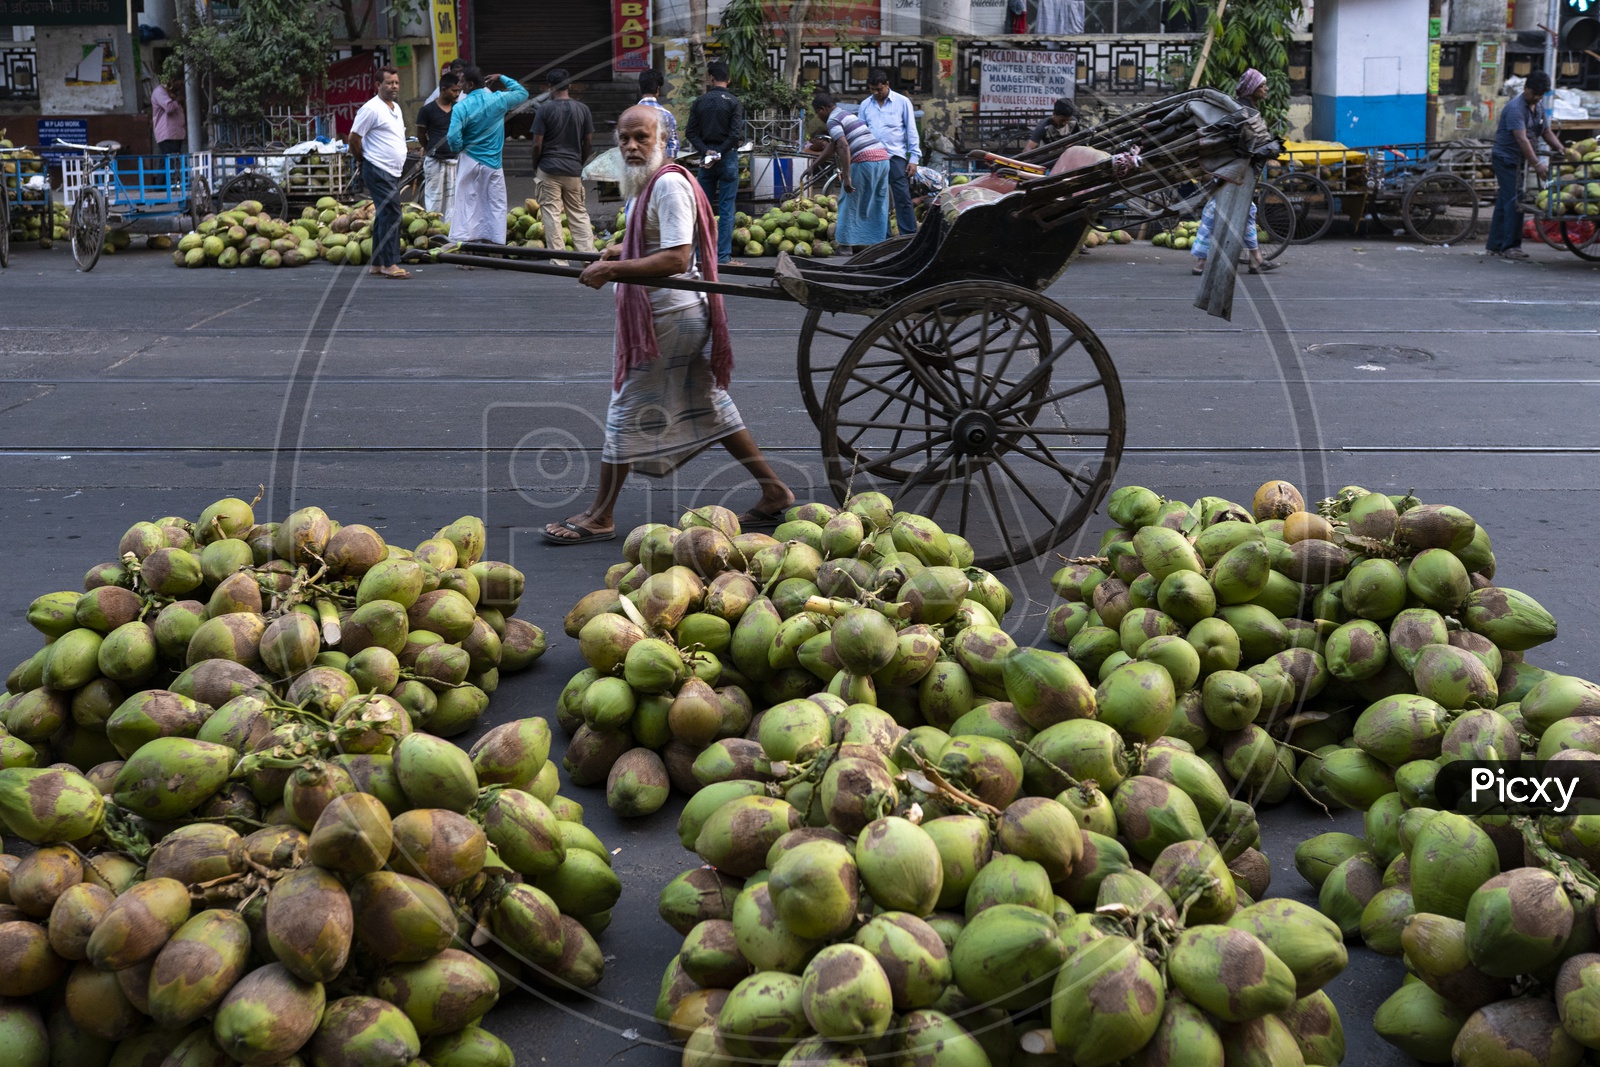 Old man pulling a rickshaw. Coconuts on the road